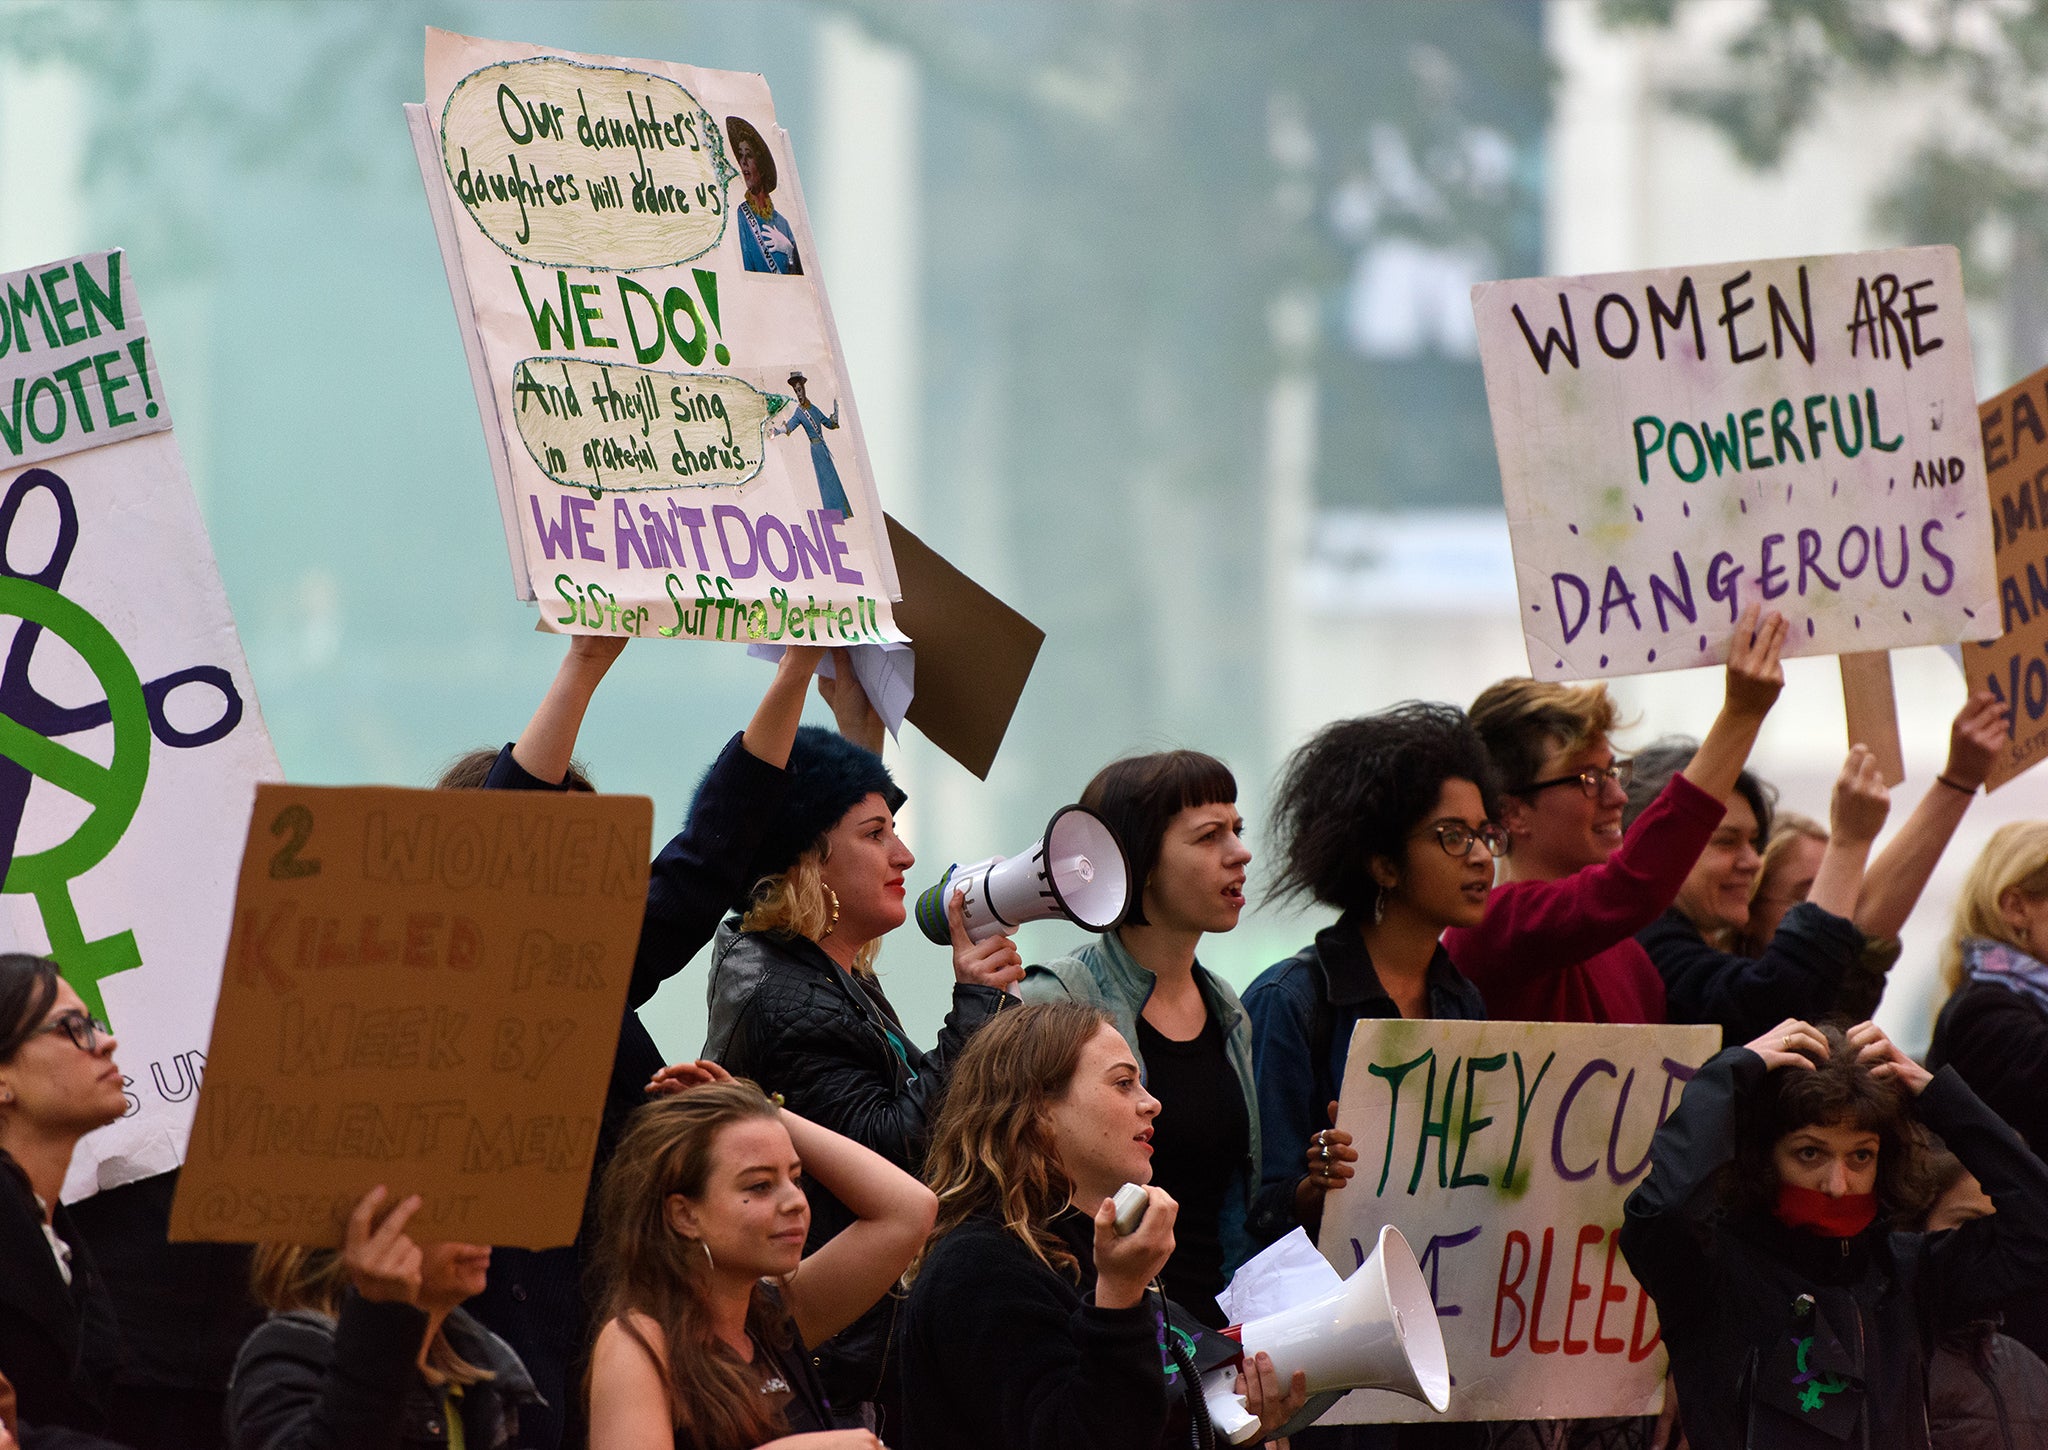 Members of Sisters Uncut demonstrate at the red carpet premiere of Suffragette at Odeon Leicester Square on October 7, 2015 in London, England. The protesters currently campaign for more support for victims of domestic violence.